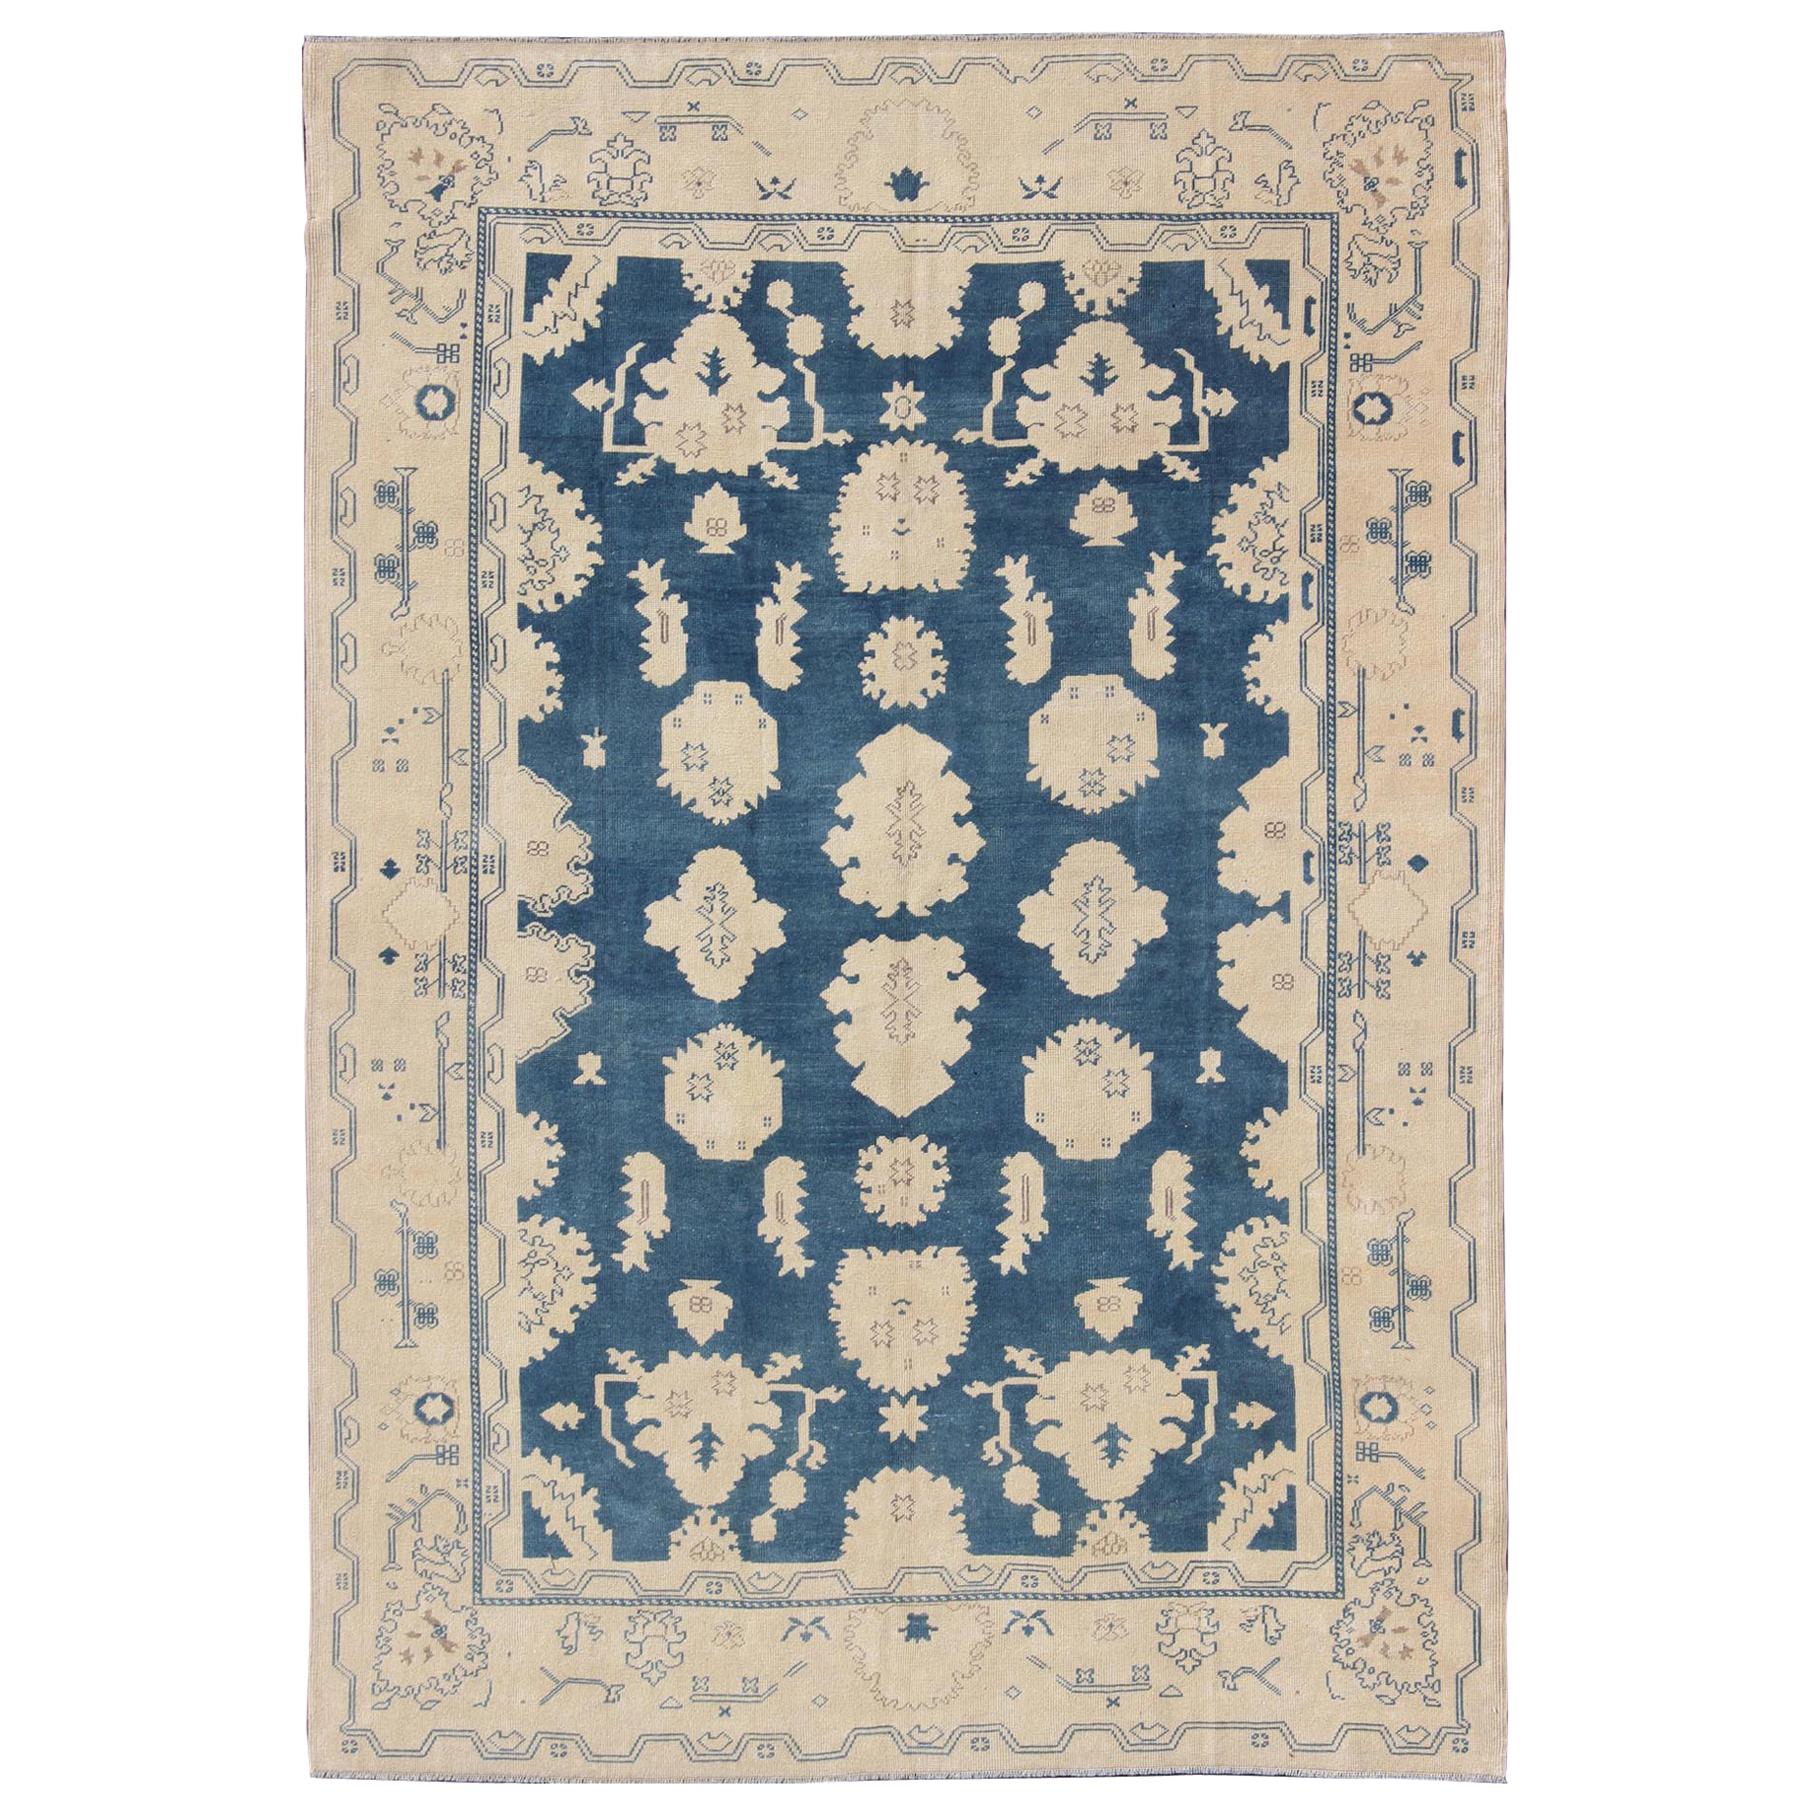 Vintage Turkish Oushak Rug with All-Over Design in Royal Blue and Ivory